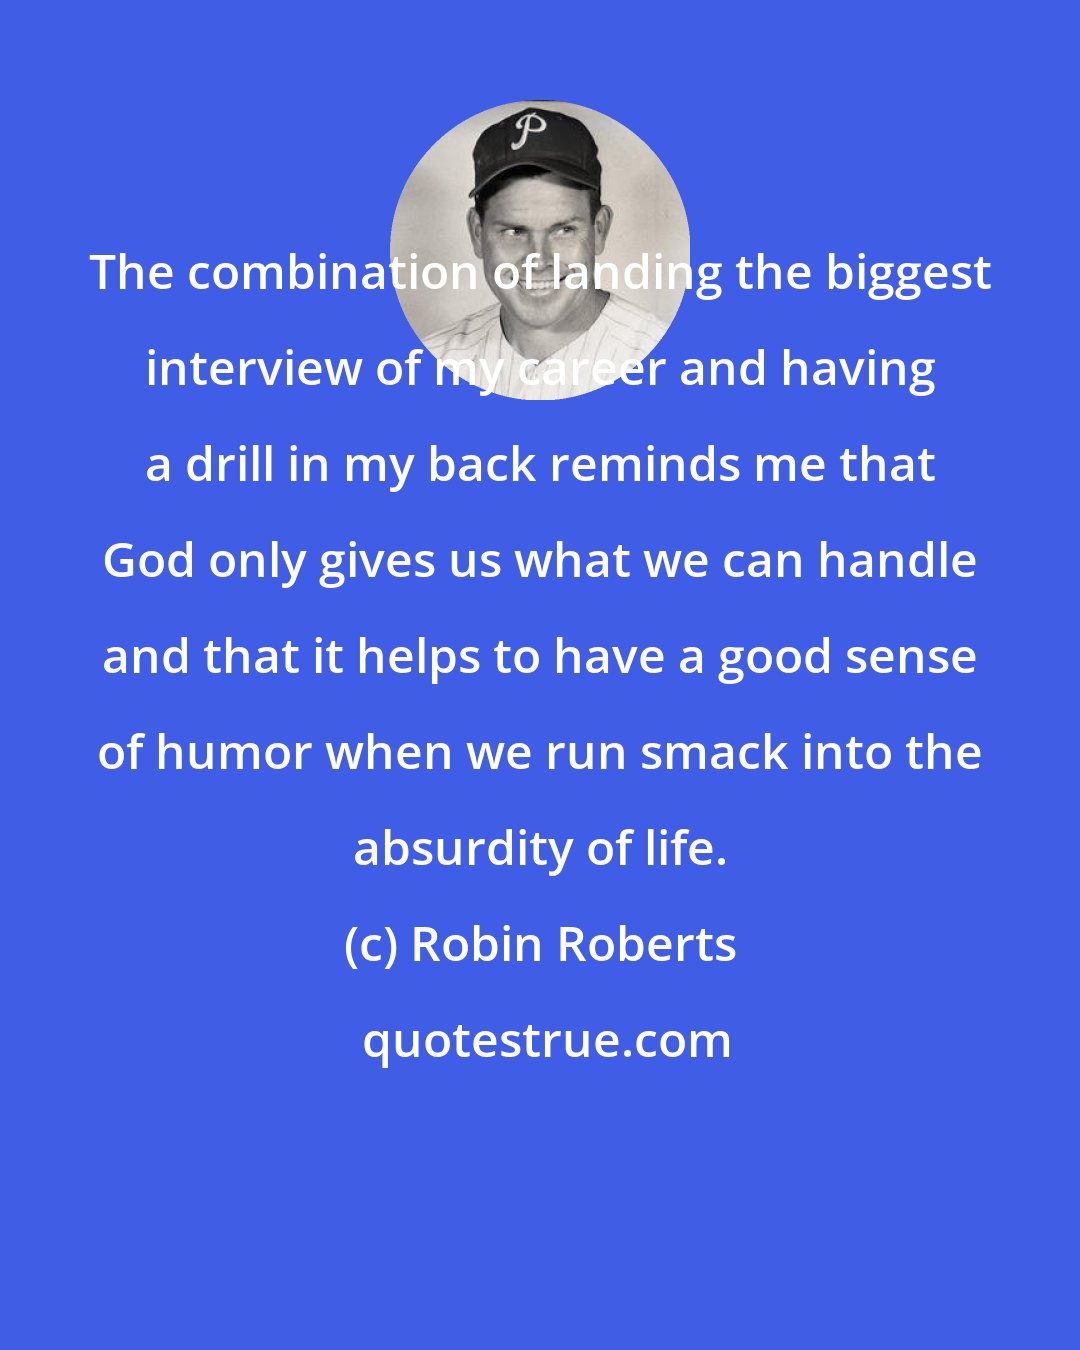 Robin Roberts: The combination of landing the biggest interview of my career and having a drill in my back reminds me that God only gives us what we can handle and that it helps to have a good sense of humor when we run smack into the absurdity of life.